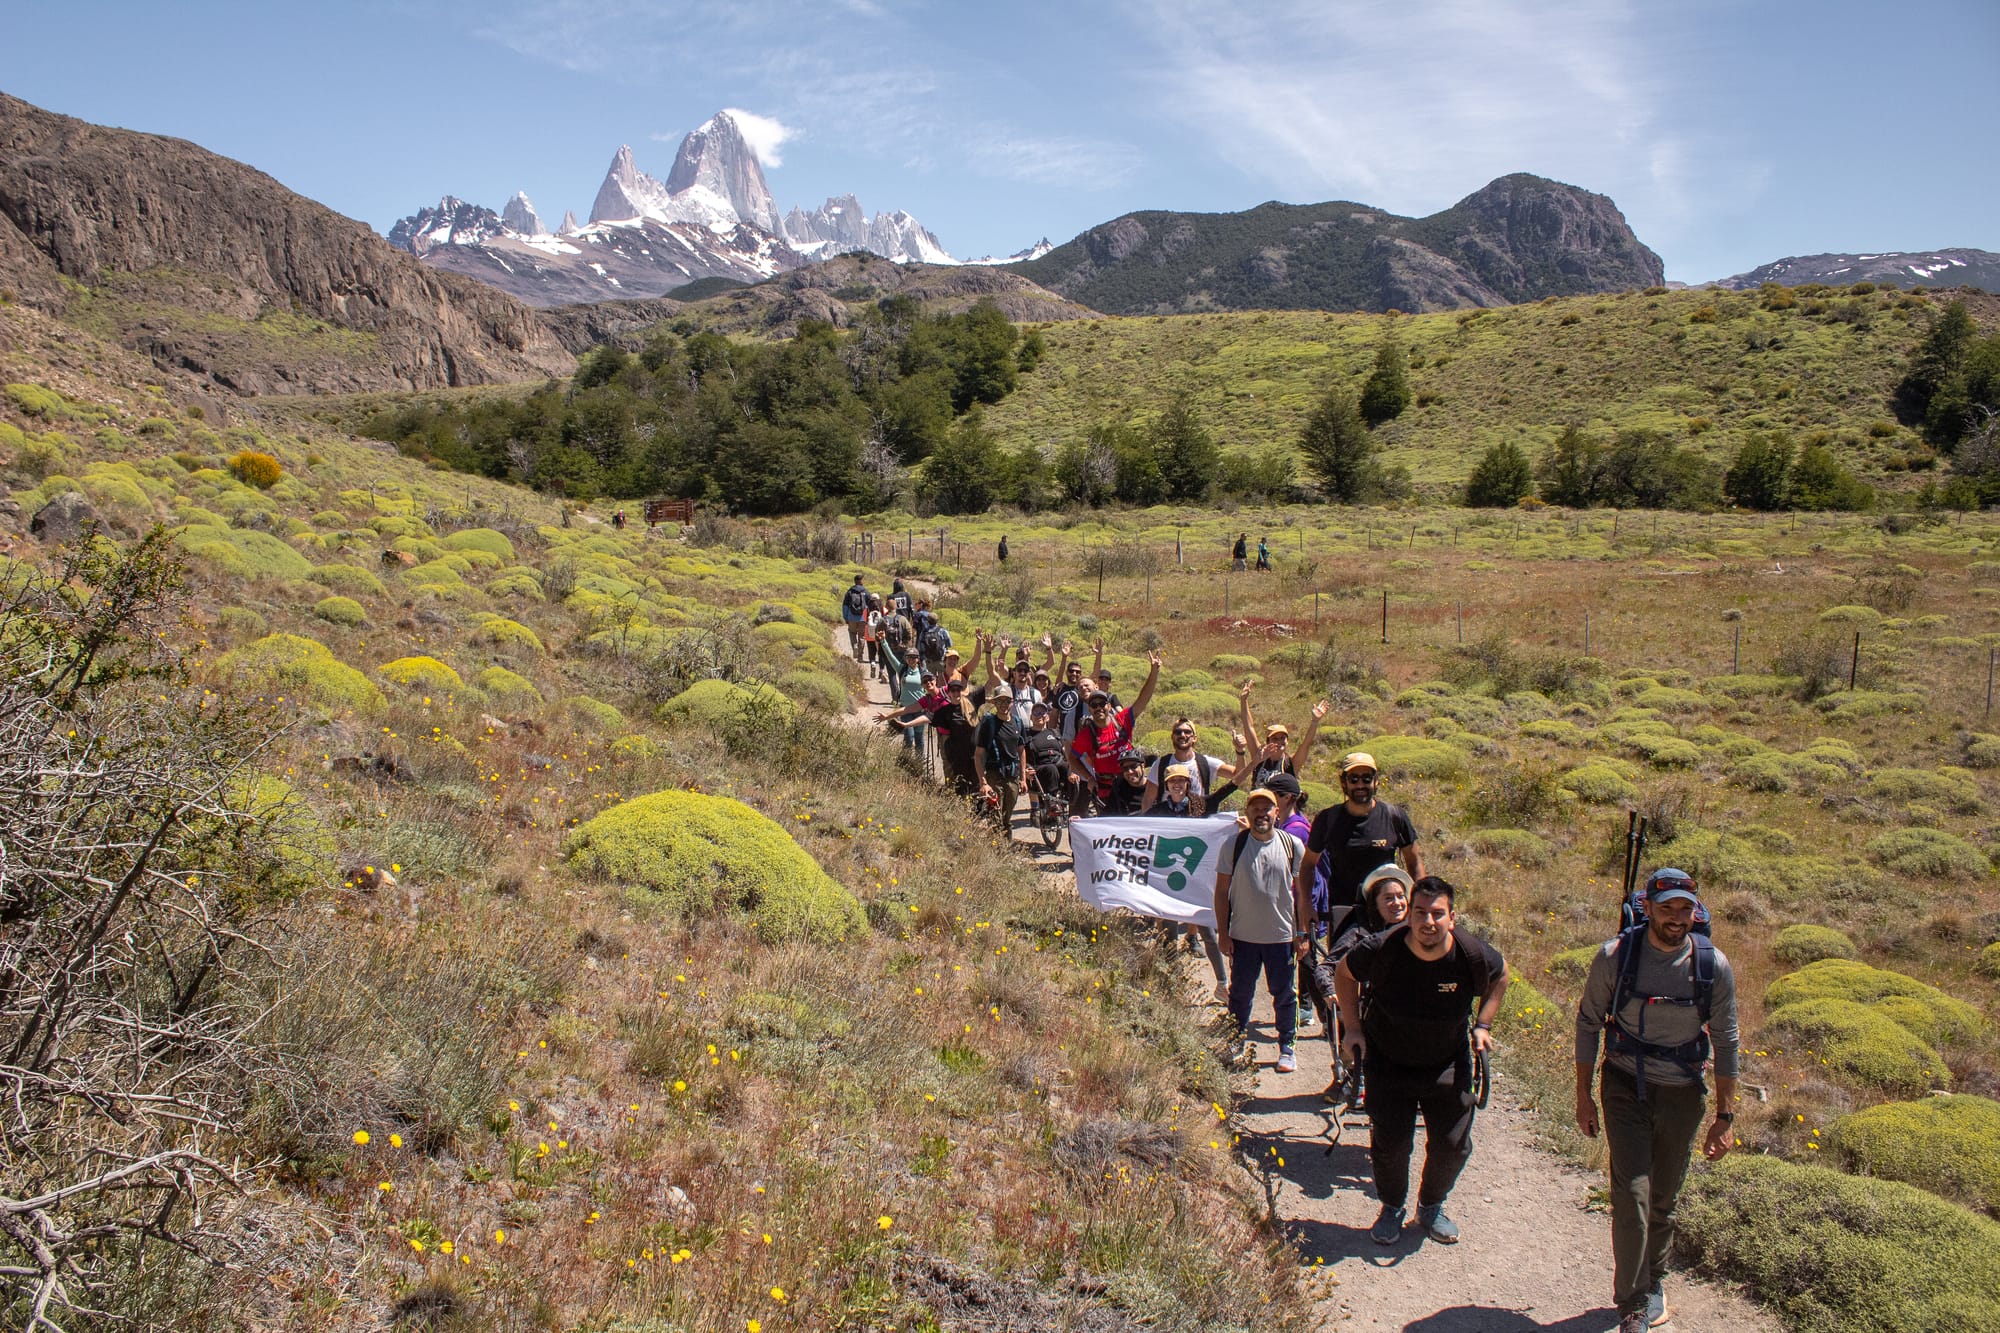 The Wheel the World team hiking a trail in El Chaltén, Patagonia with 3 wheelchair-users